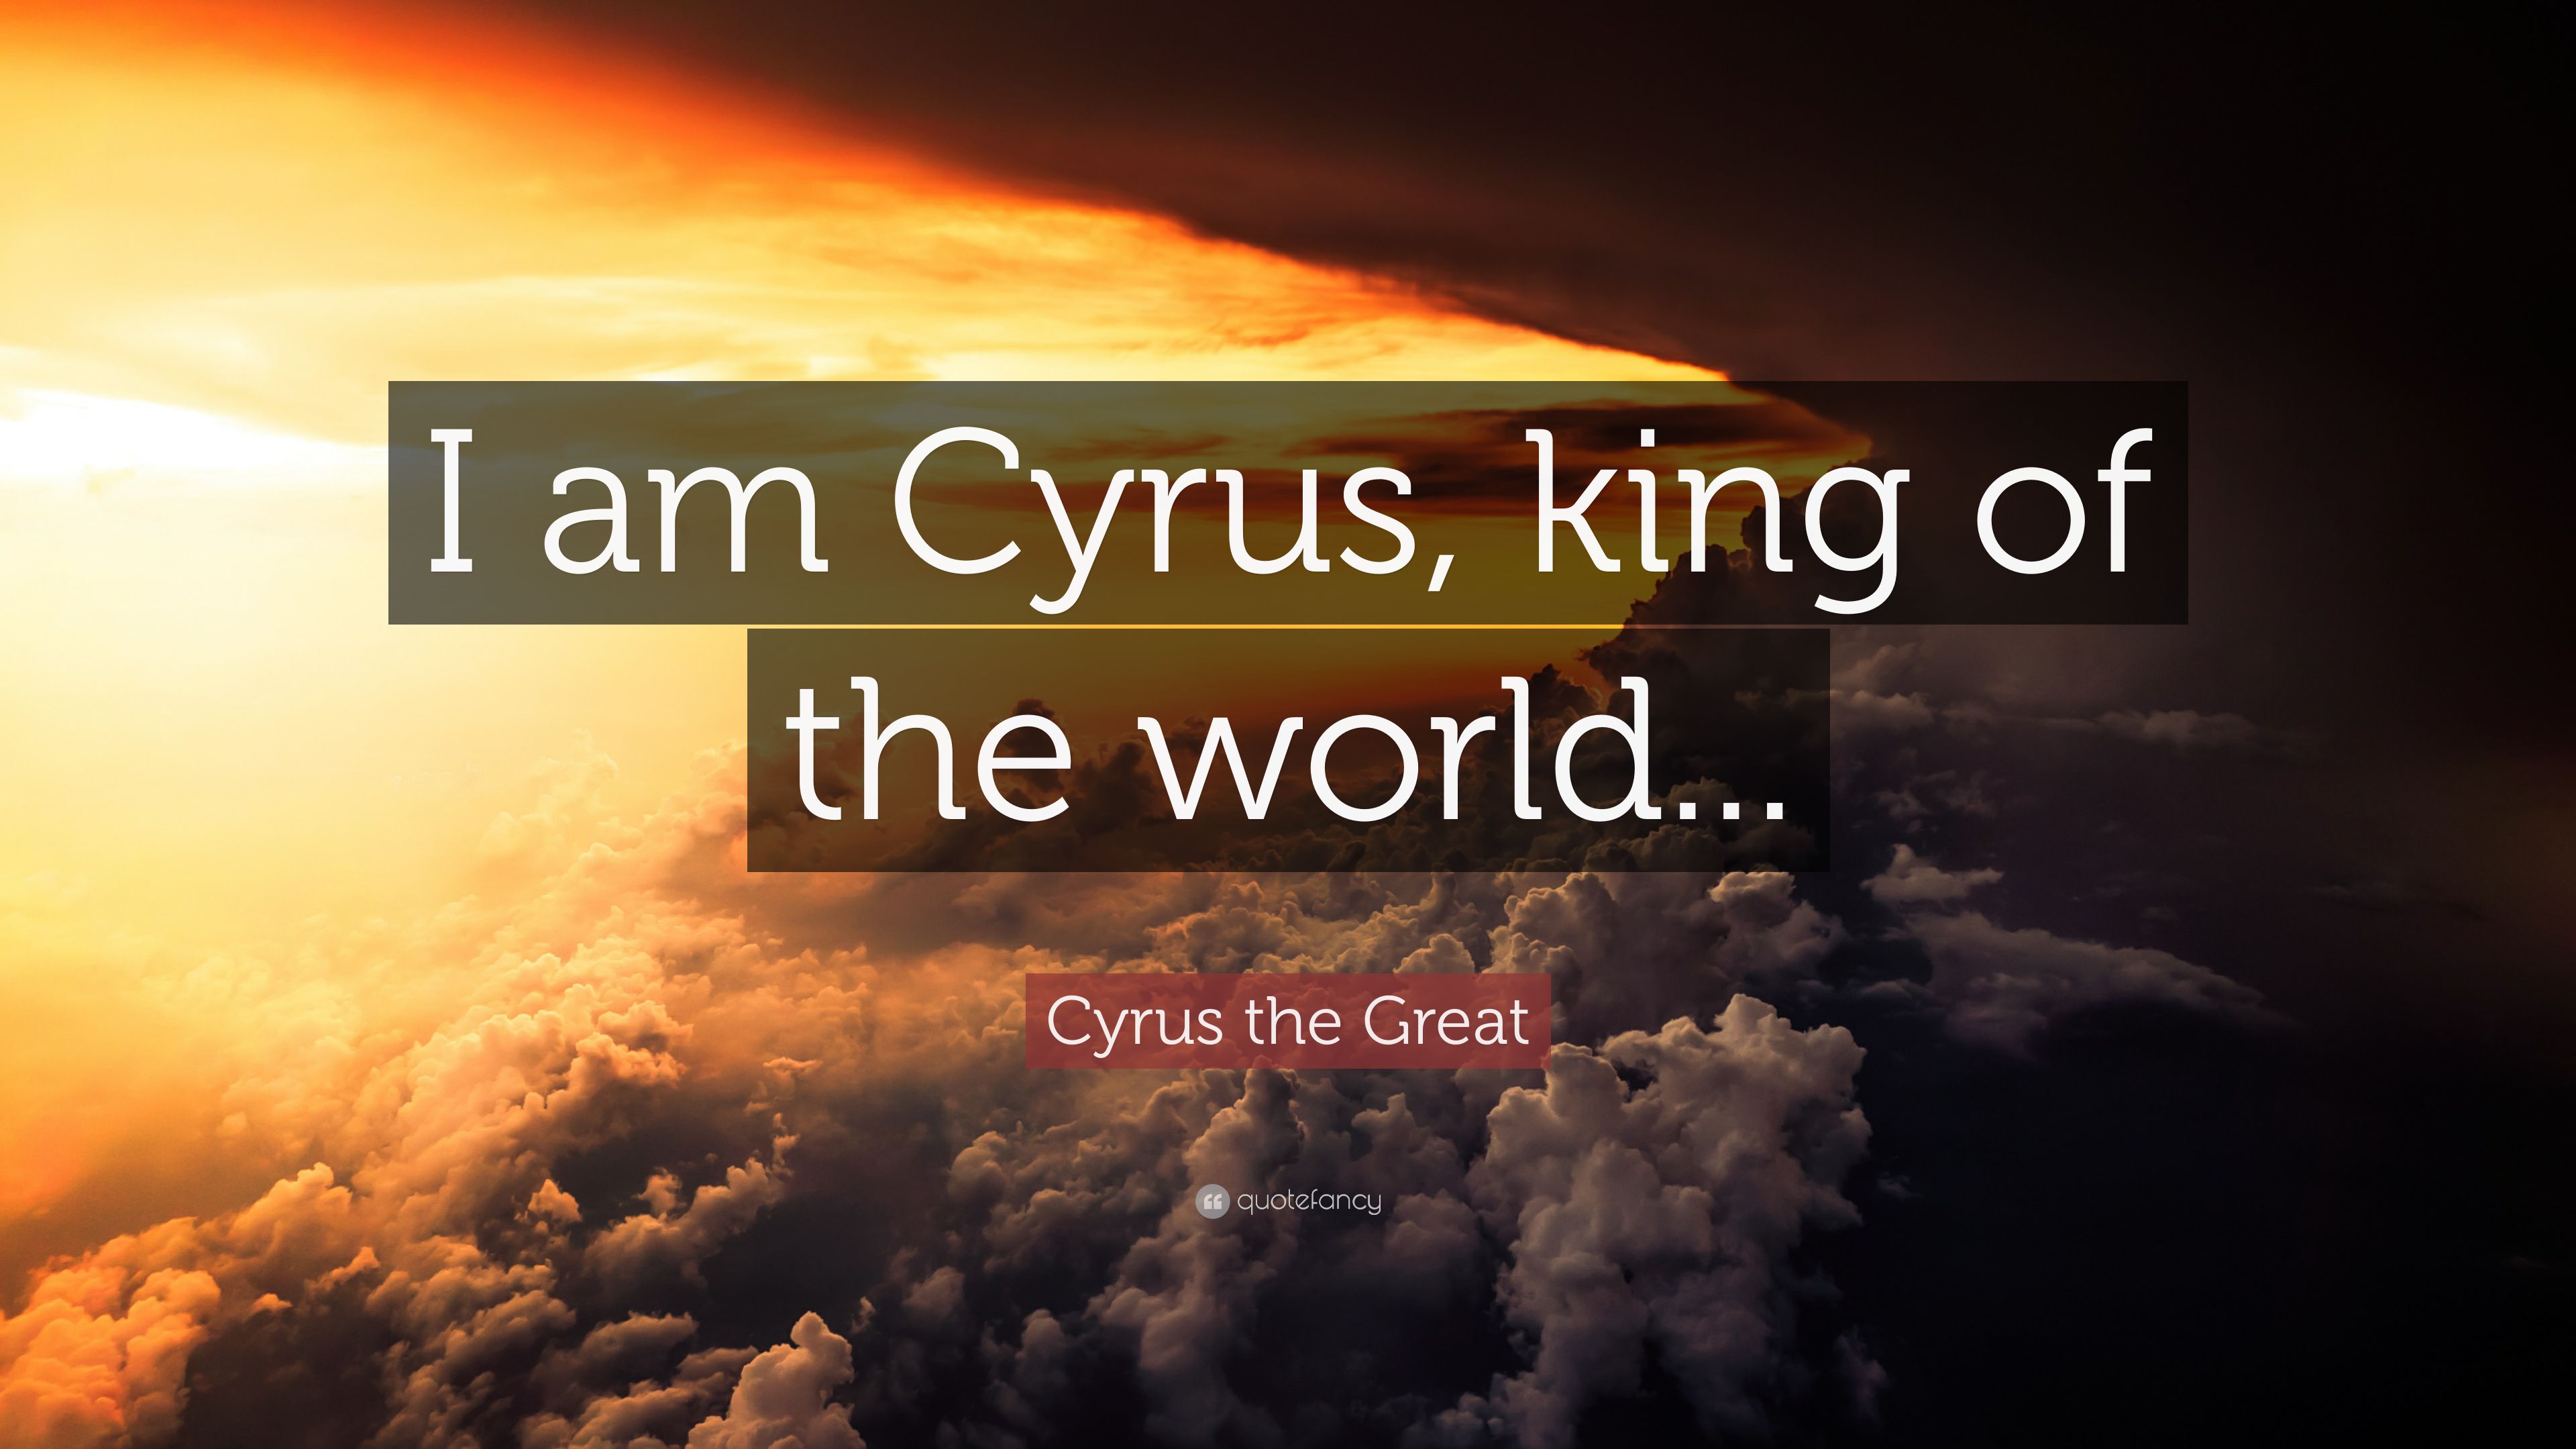 Cyrus the Great Quote: “I am Cyrus, king of the world.” 12